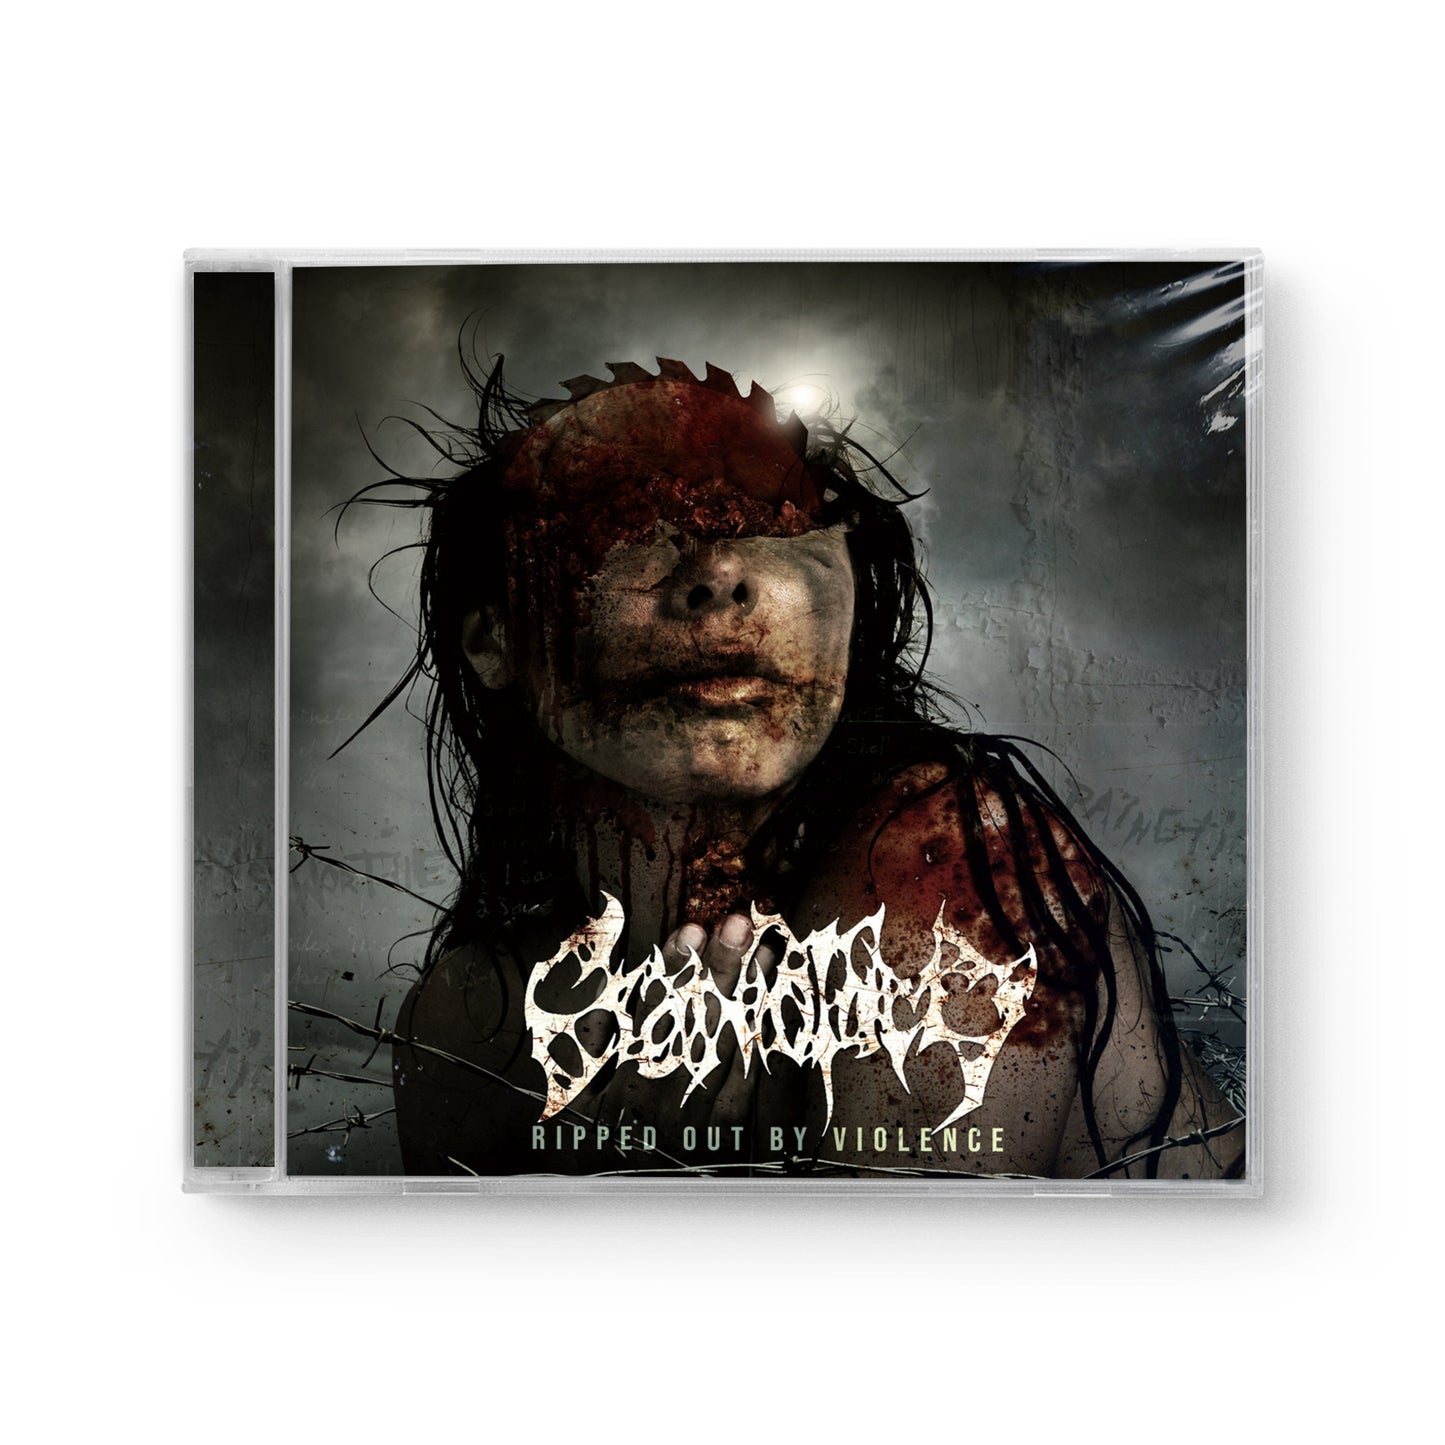 Craniotomy "Ripped Out By Violence" CD